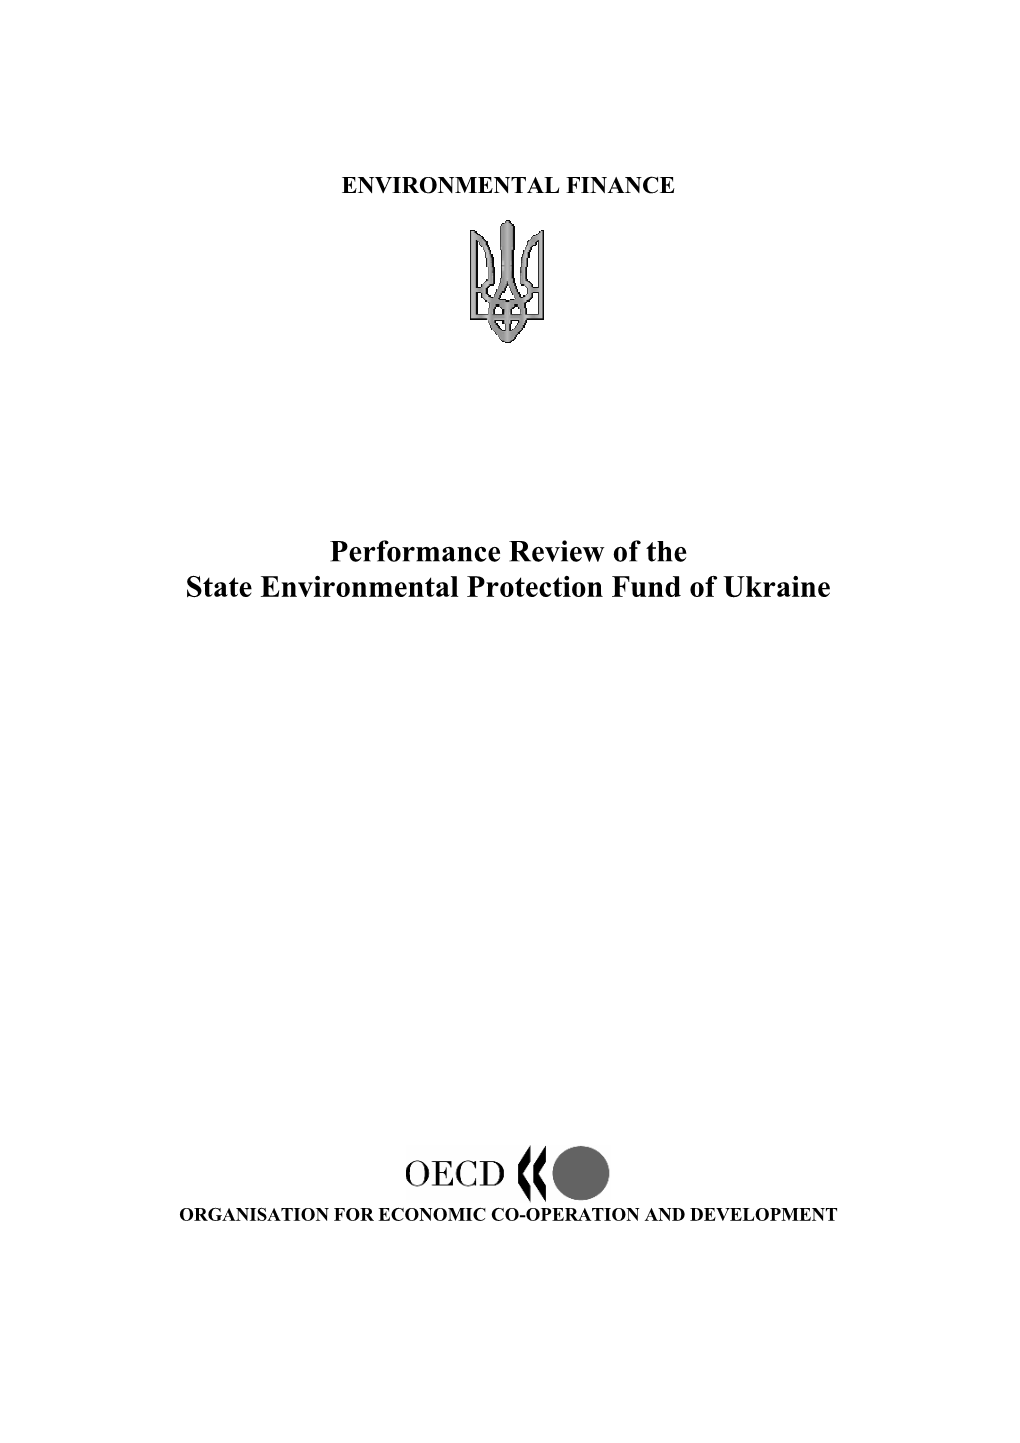 Performance Review of the State Environmental Protection Fund of Ukraine